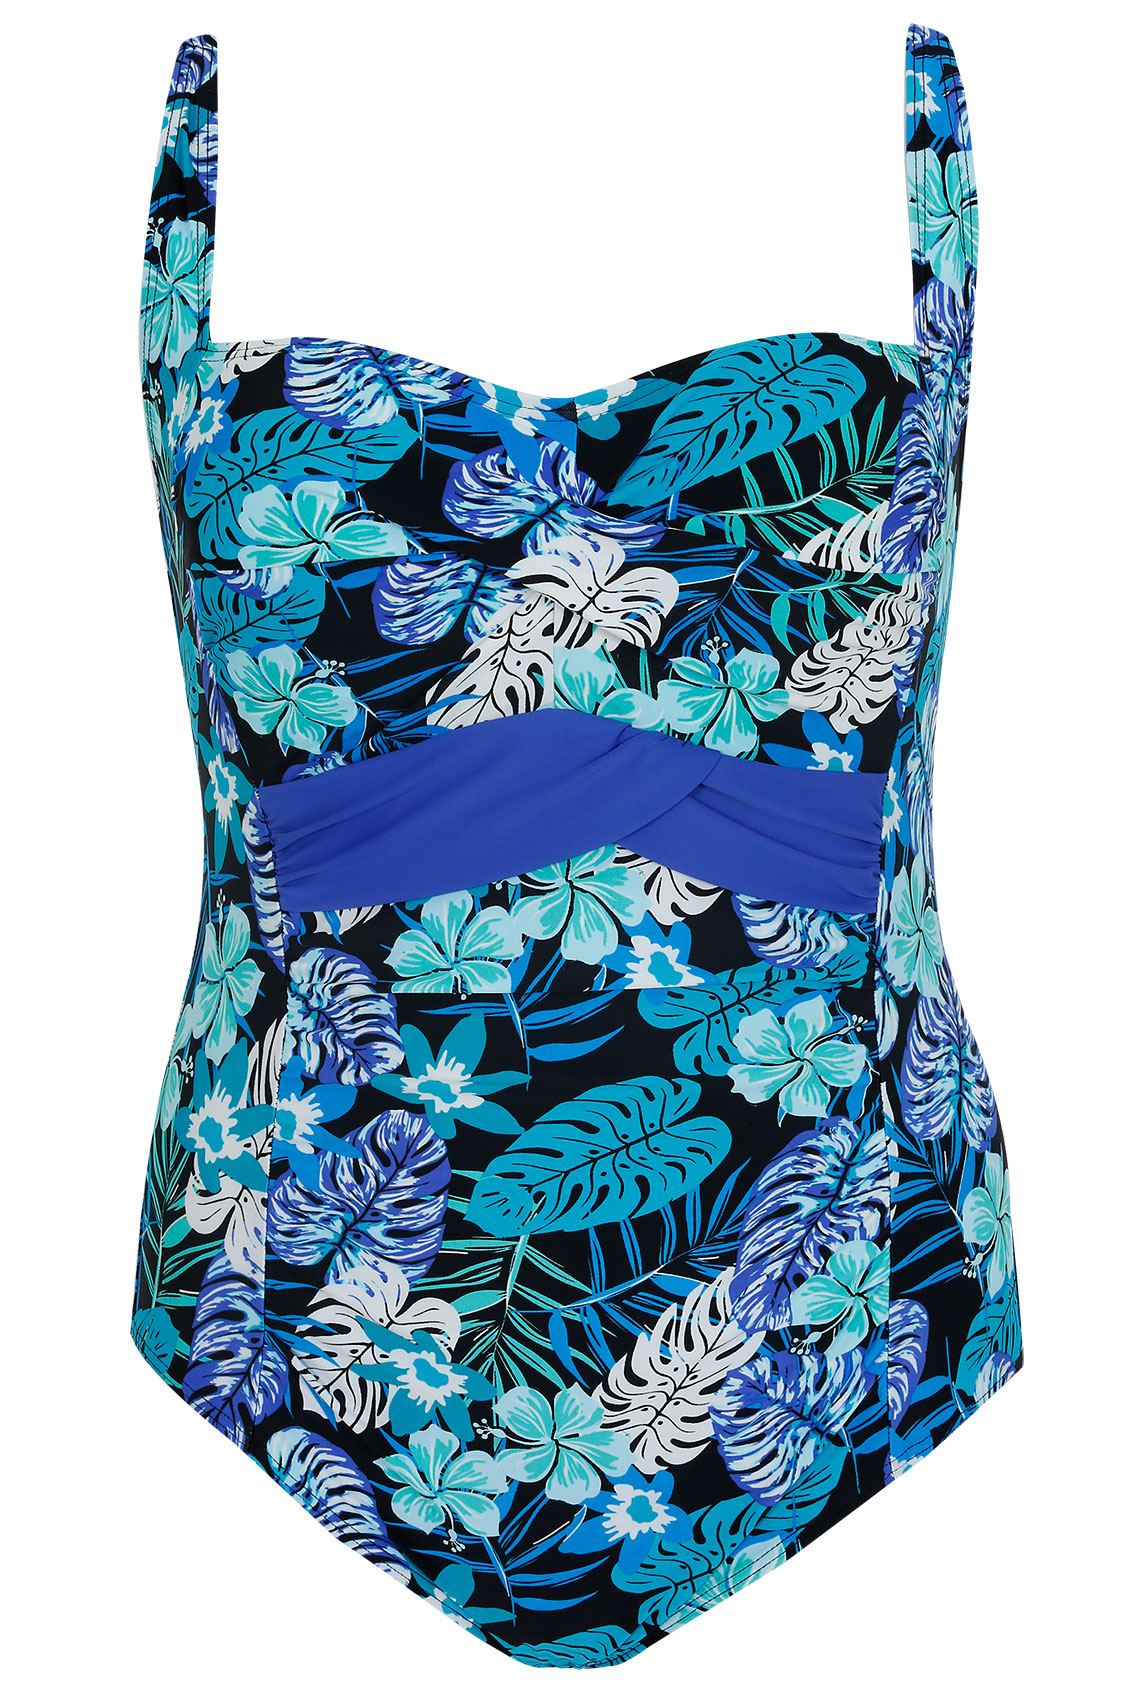 Blue & Green Tropical Hawaiian Print Swimsuit Plus Size 16 to 32